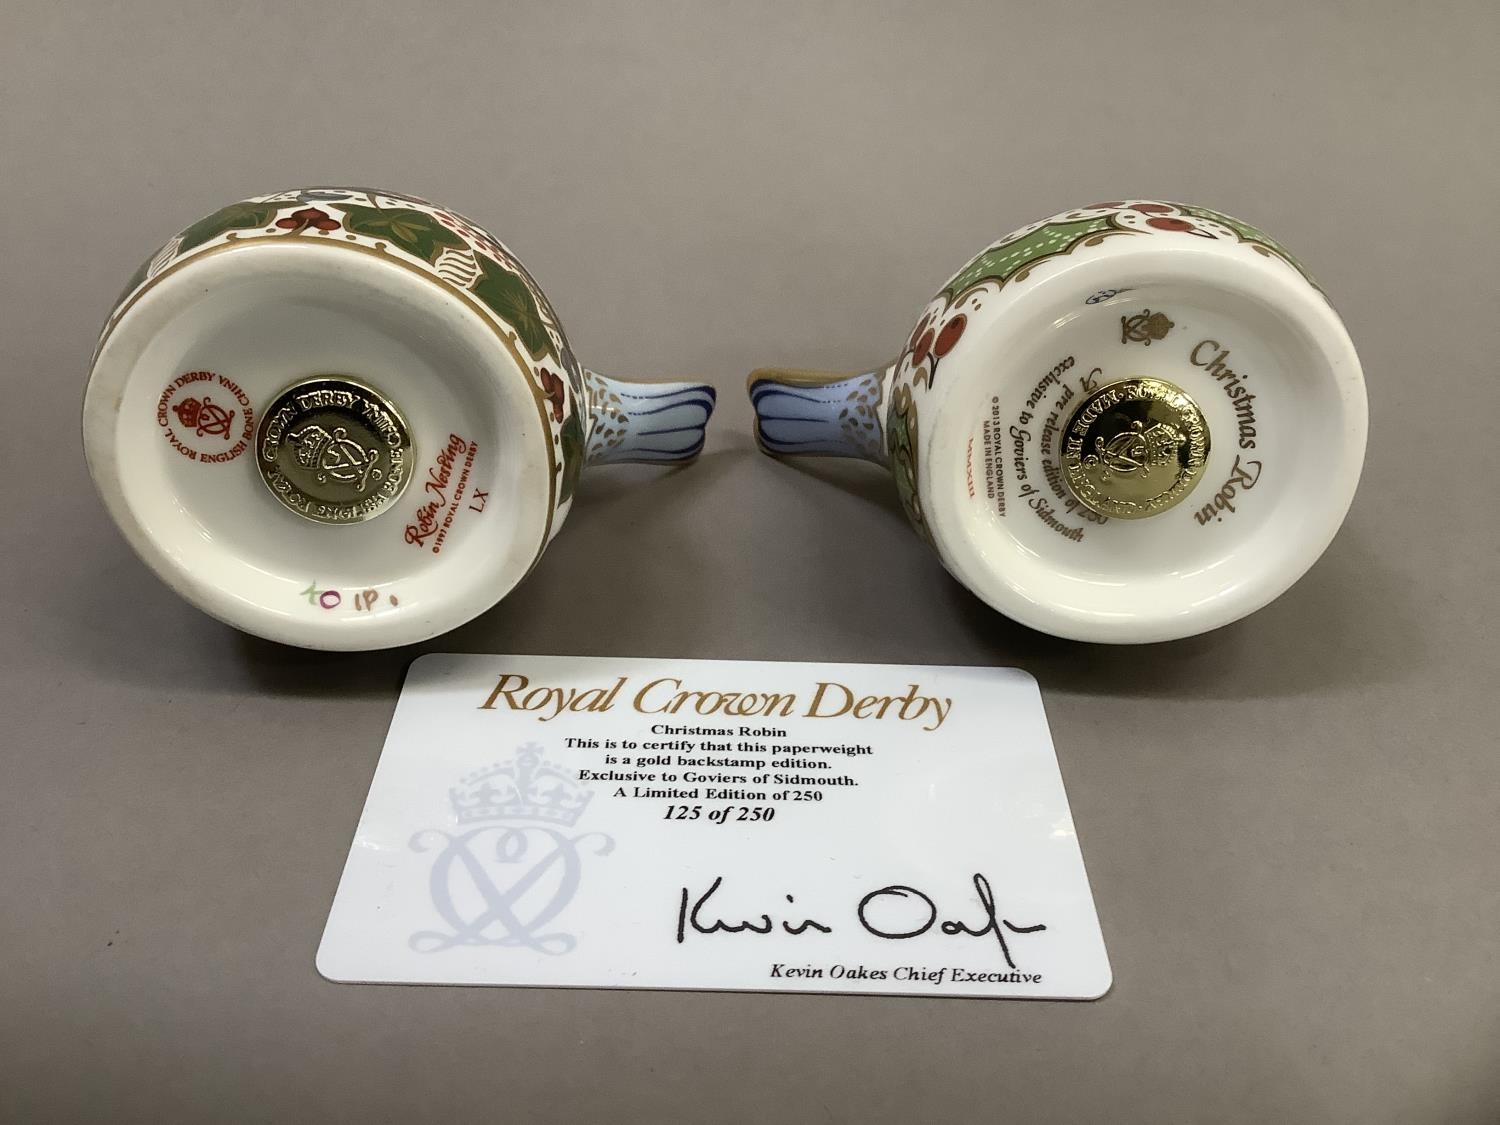 Two Royal Crown Derby Christmas robins, one a pre-release edition of 250 exclusive to Goviers of - Image 5 of 5